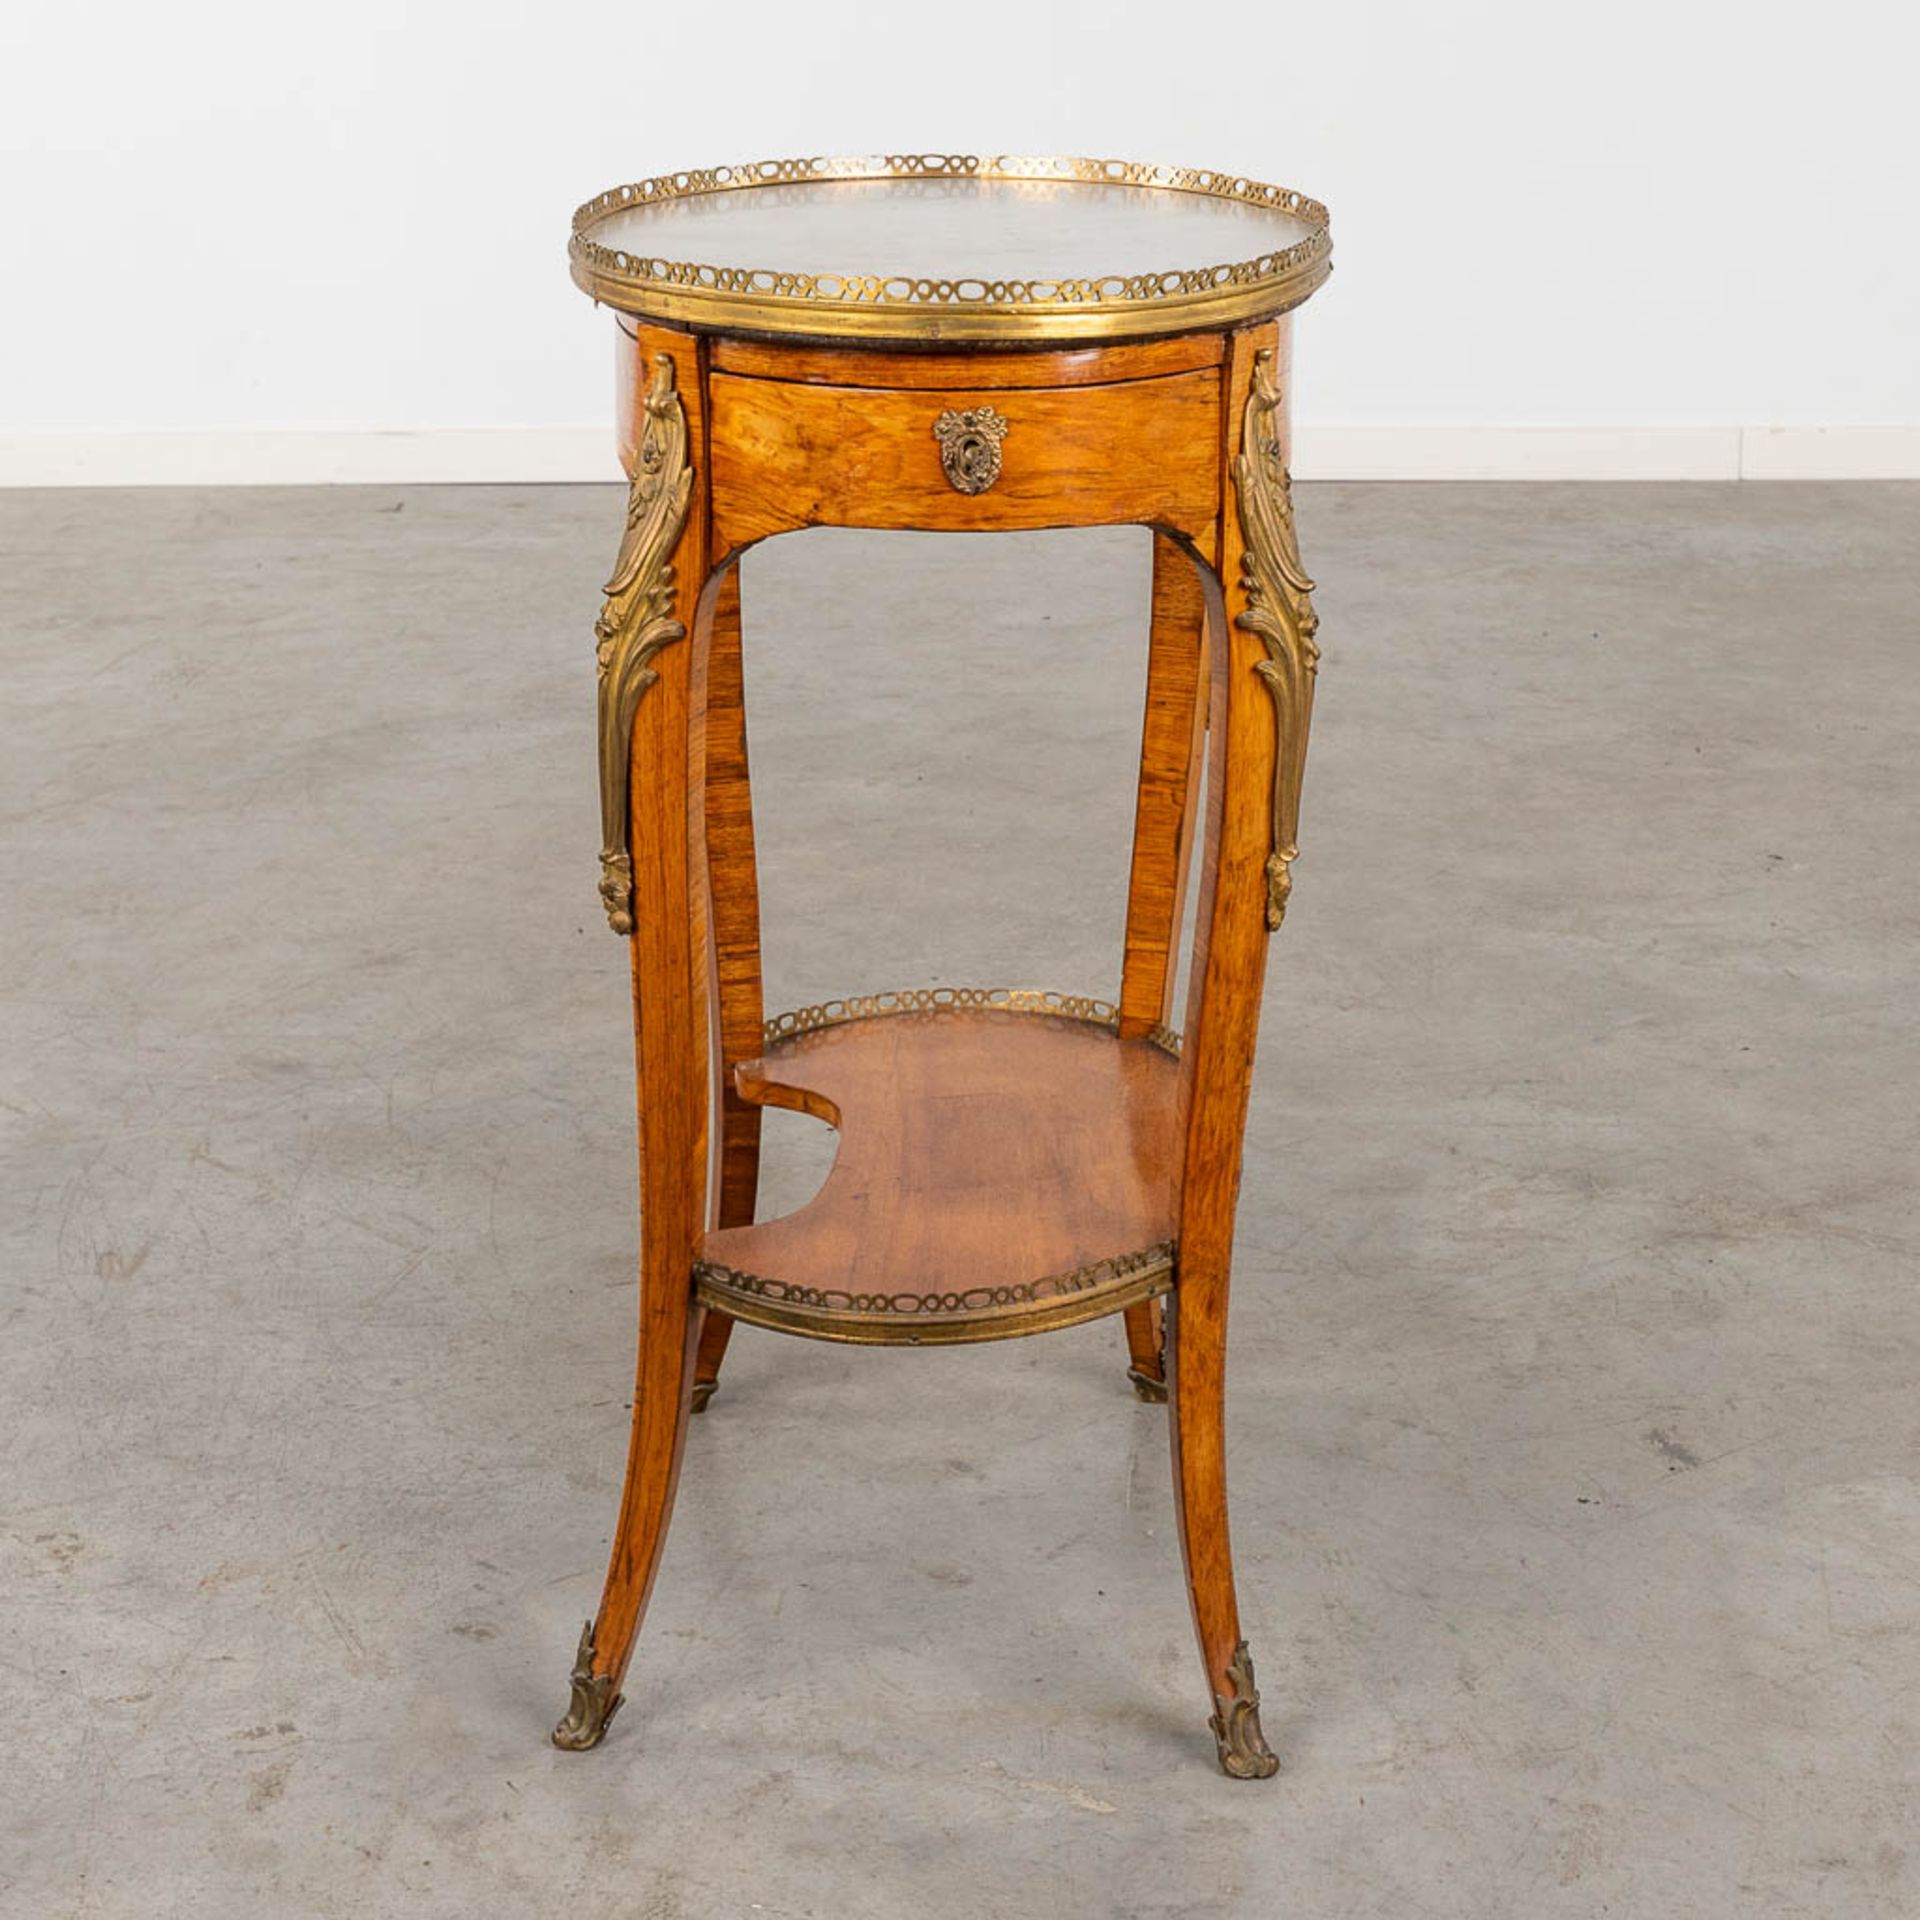 An antique side table, Louis XV, marquetry mounted with bronze and marble, 18th C. (D:38 x W:50 x H: - Image 7 of 14